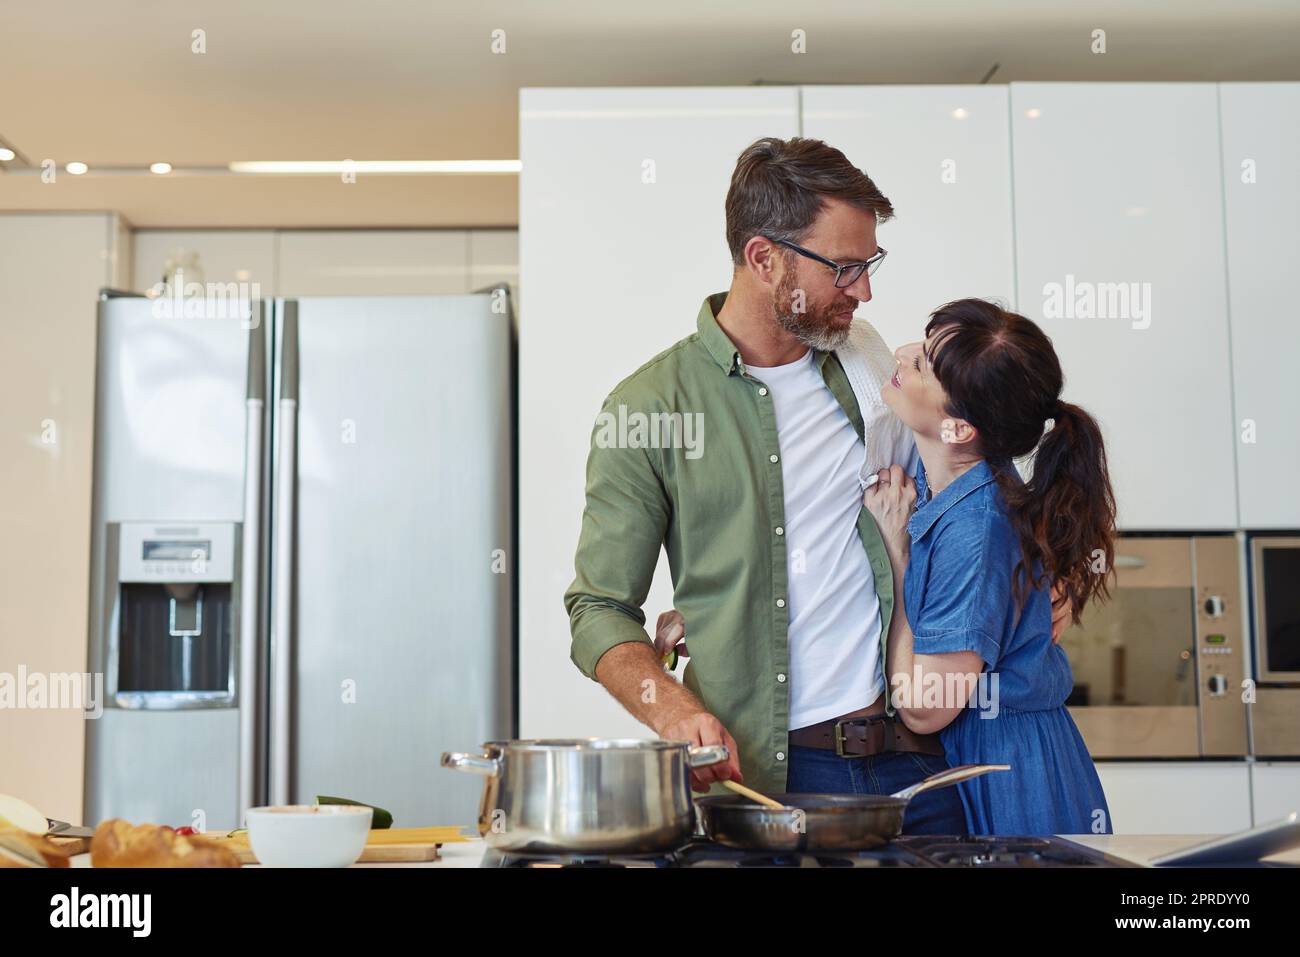 Im cooking for you today babe. a mature couple cooking together at home. Stock Photo